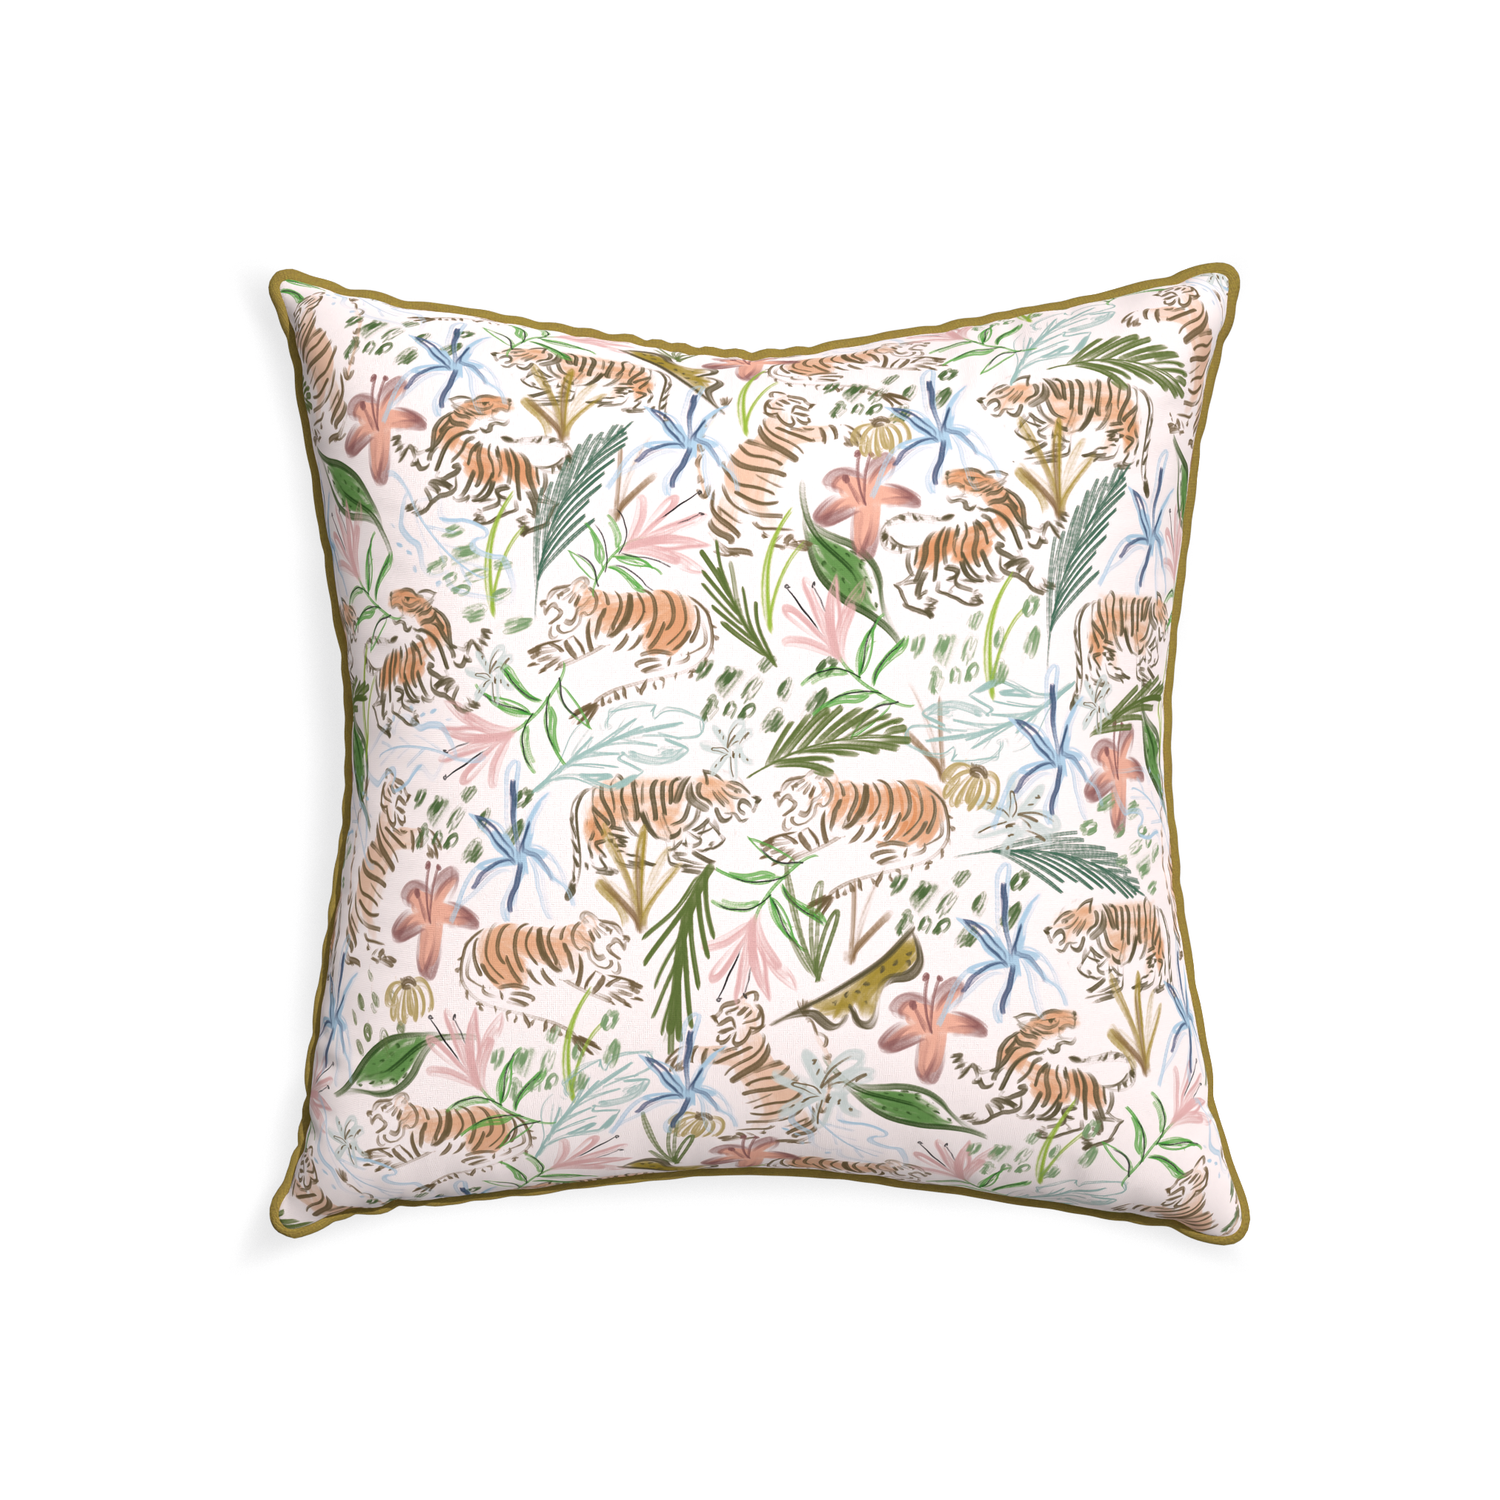 22-square frida pink custom pink chinoiserie tigerpillow with c piping on white background